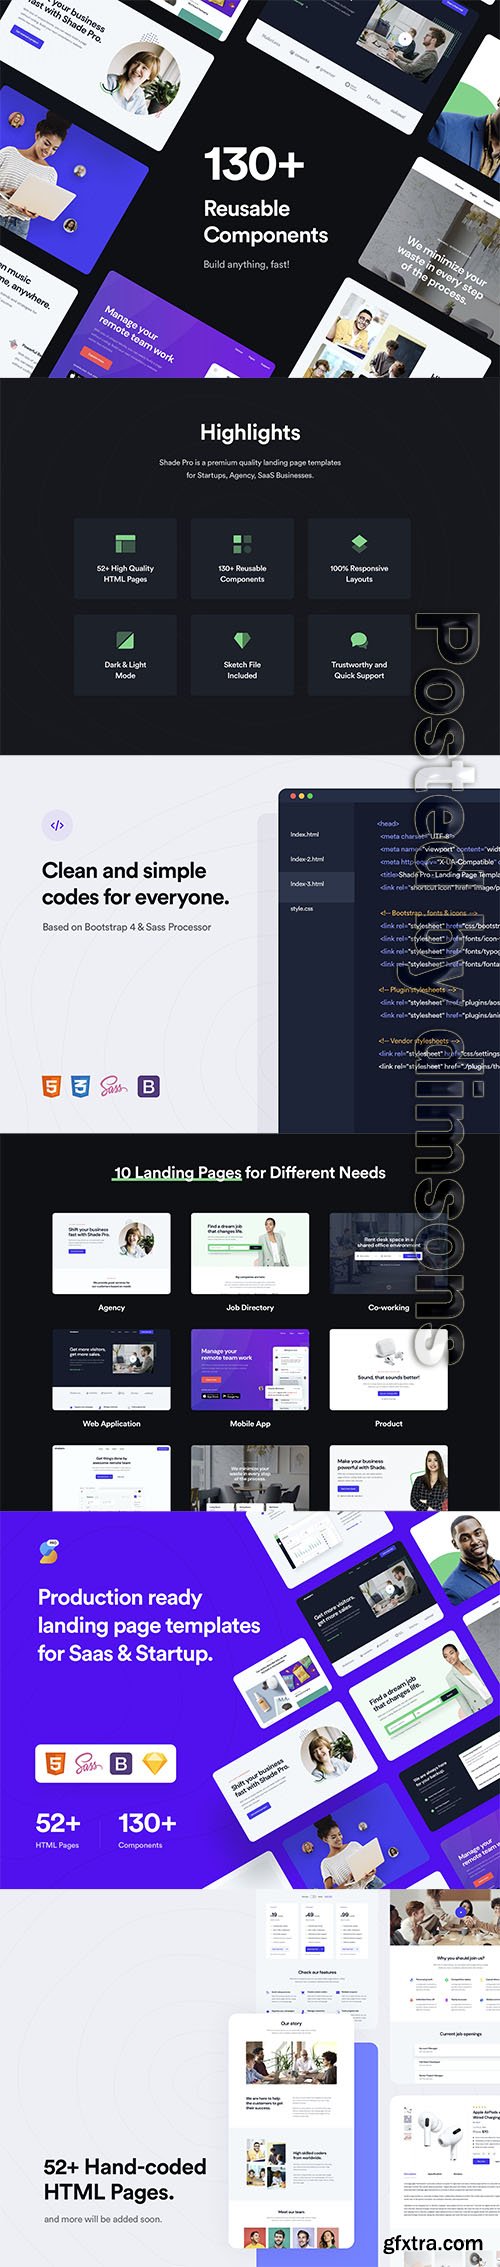 Shade Pro - Landing Page Templates